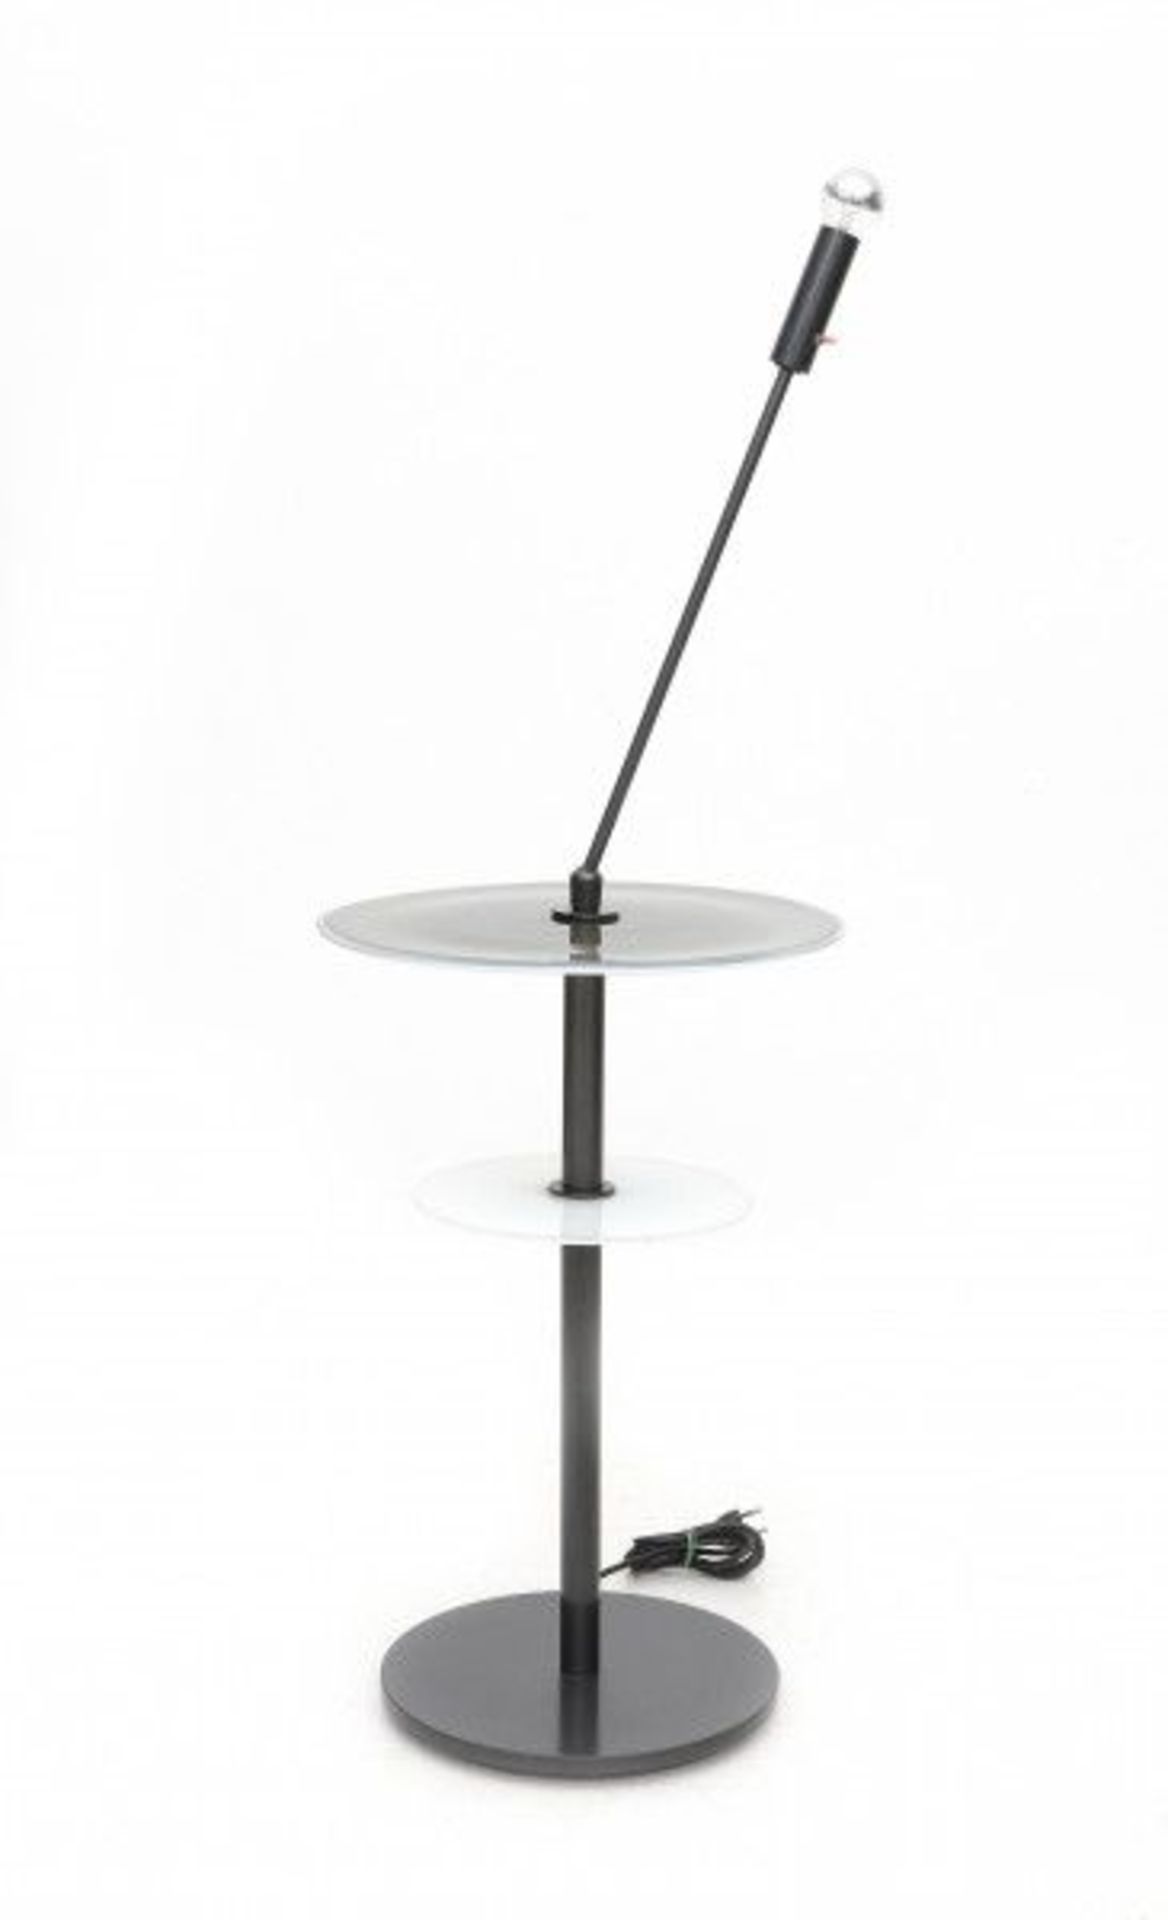 Daniela Puppa & Franco RaggiA glass and metal occasional table with integrated lamp, model Altair